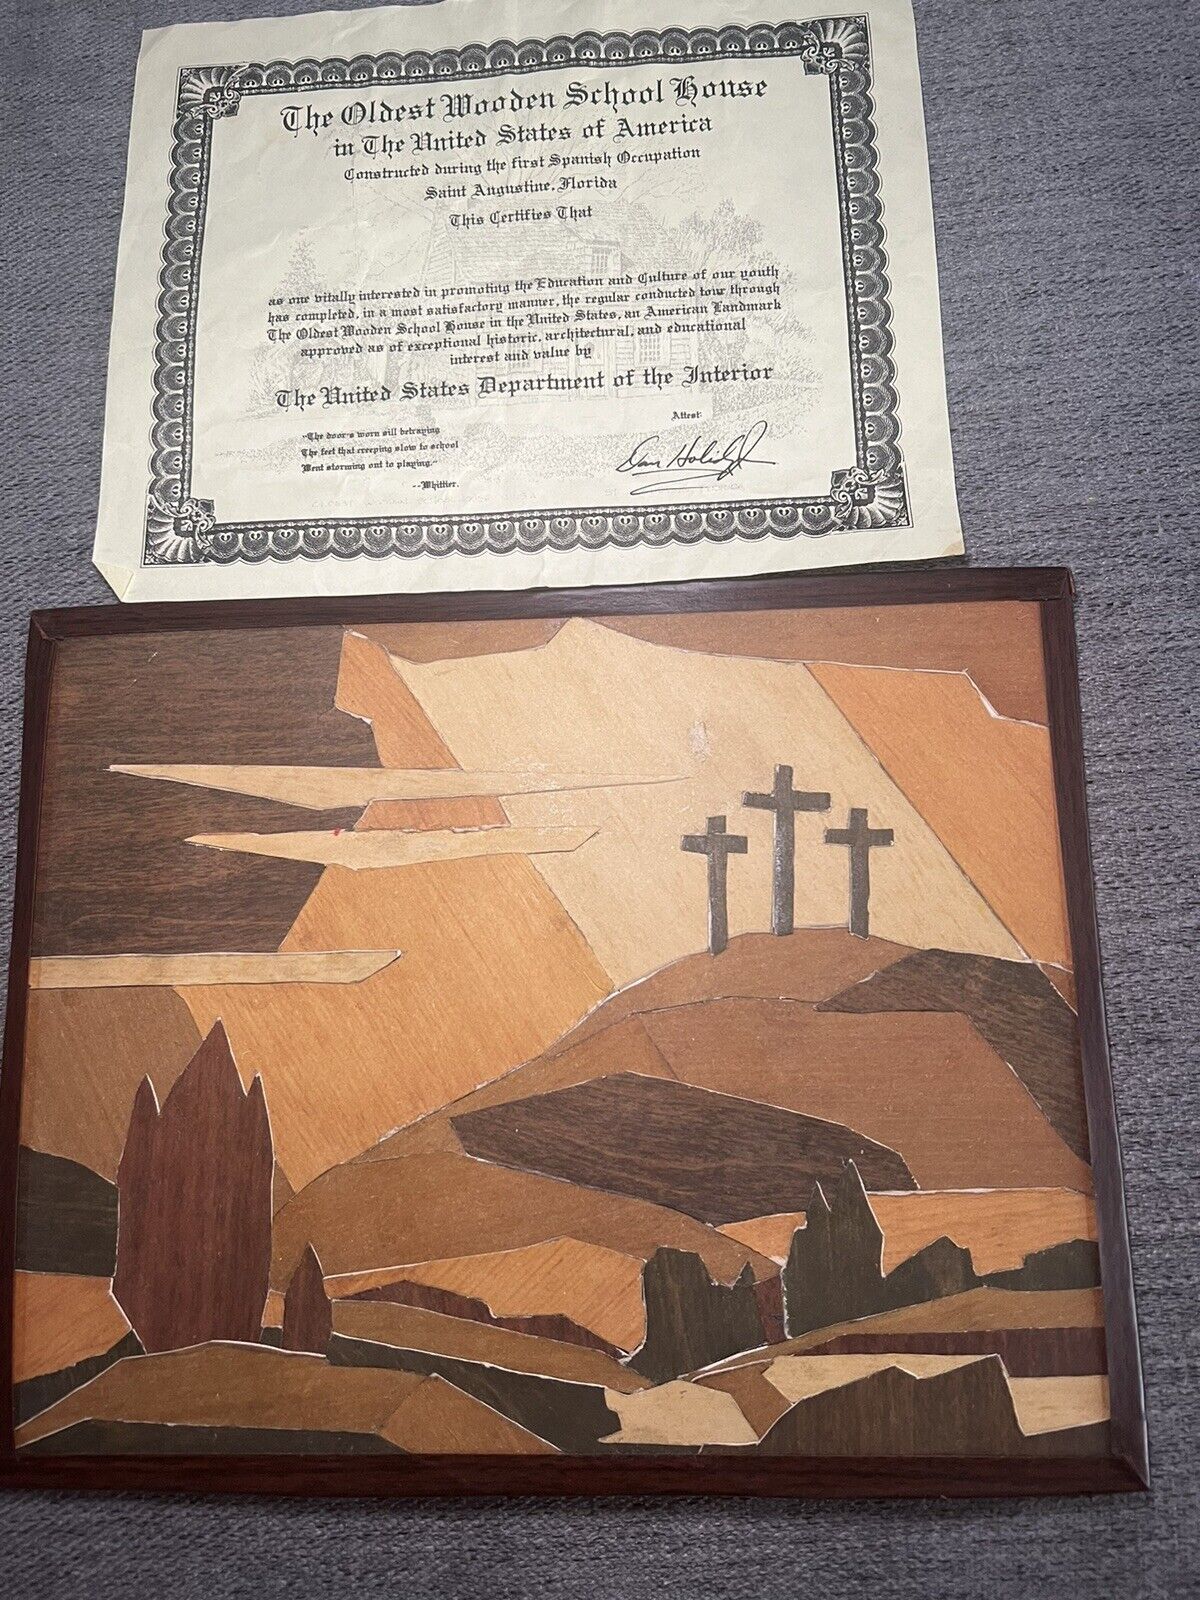 Oldest Wooden School in America Wood Chip Art Authenticated See Certificate